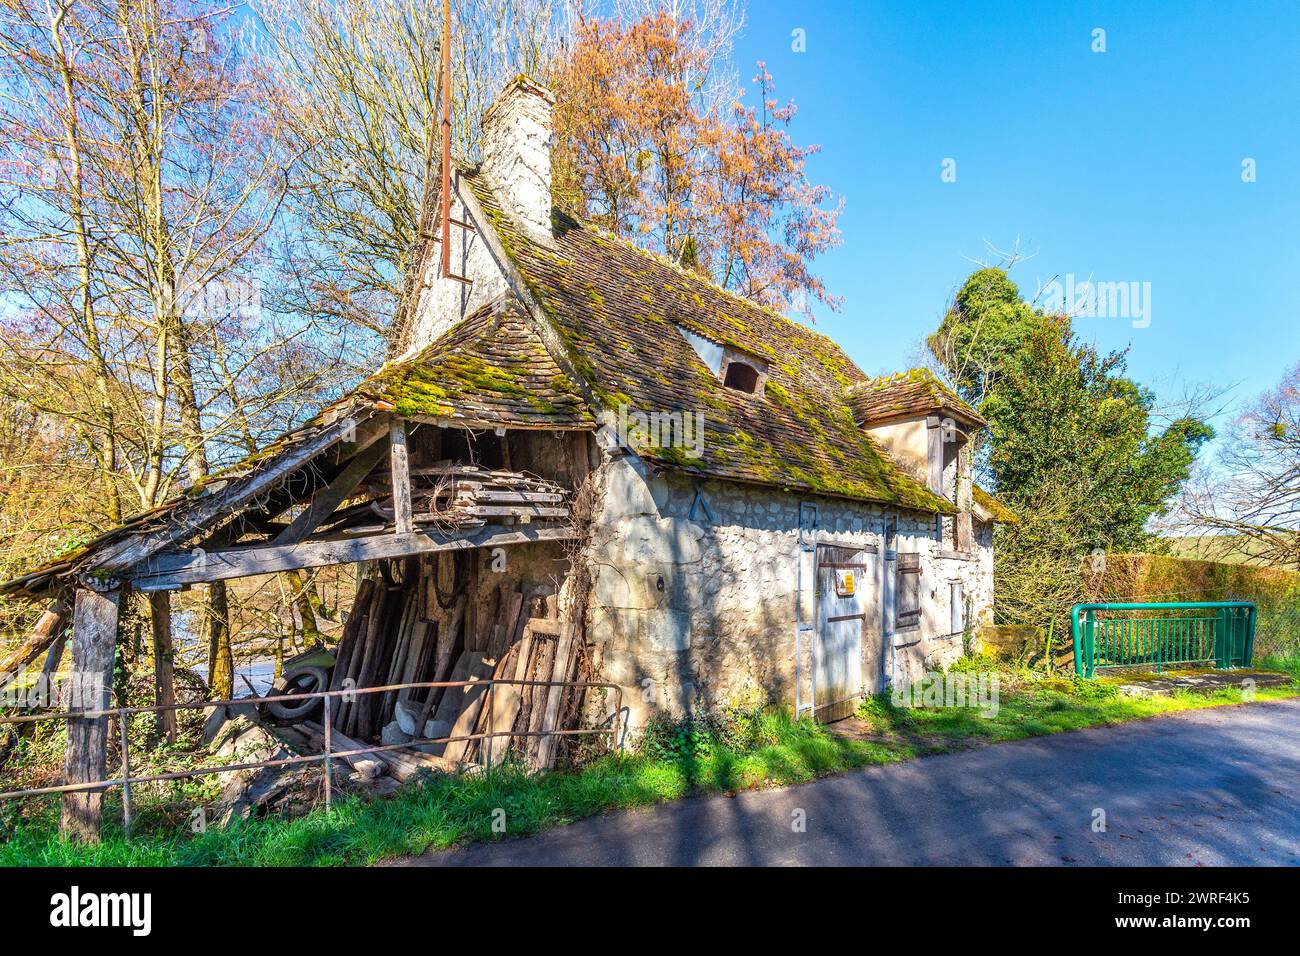 Semi-derelict rural roadside property typical for renovation project - central France. Stock Photo